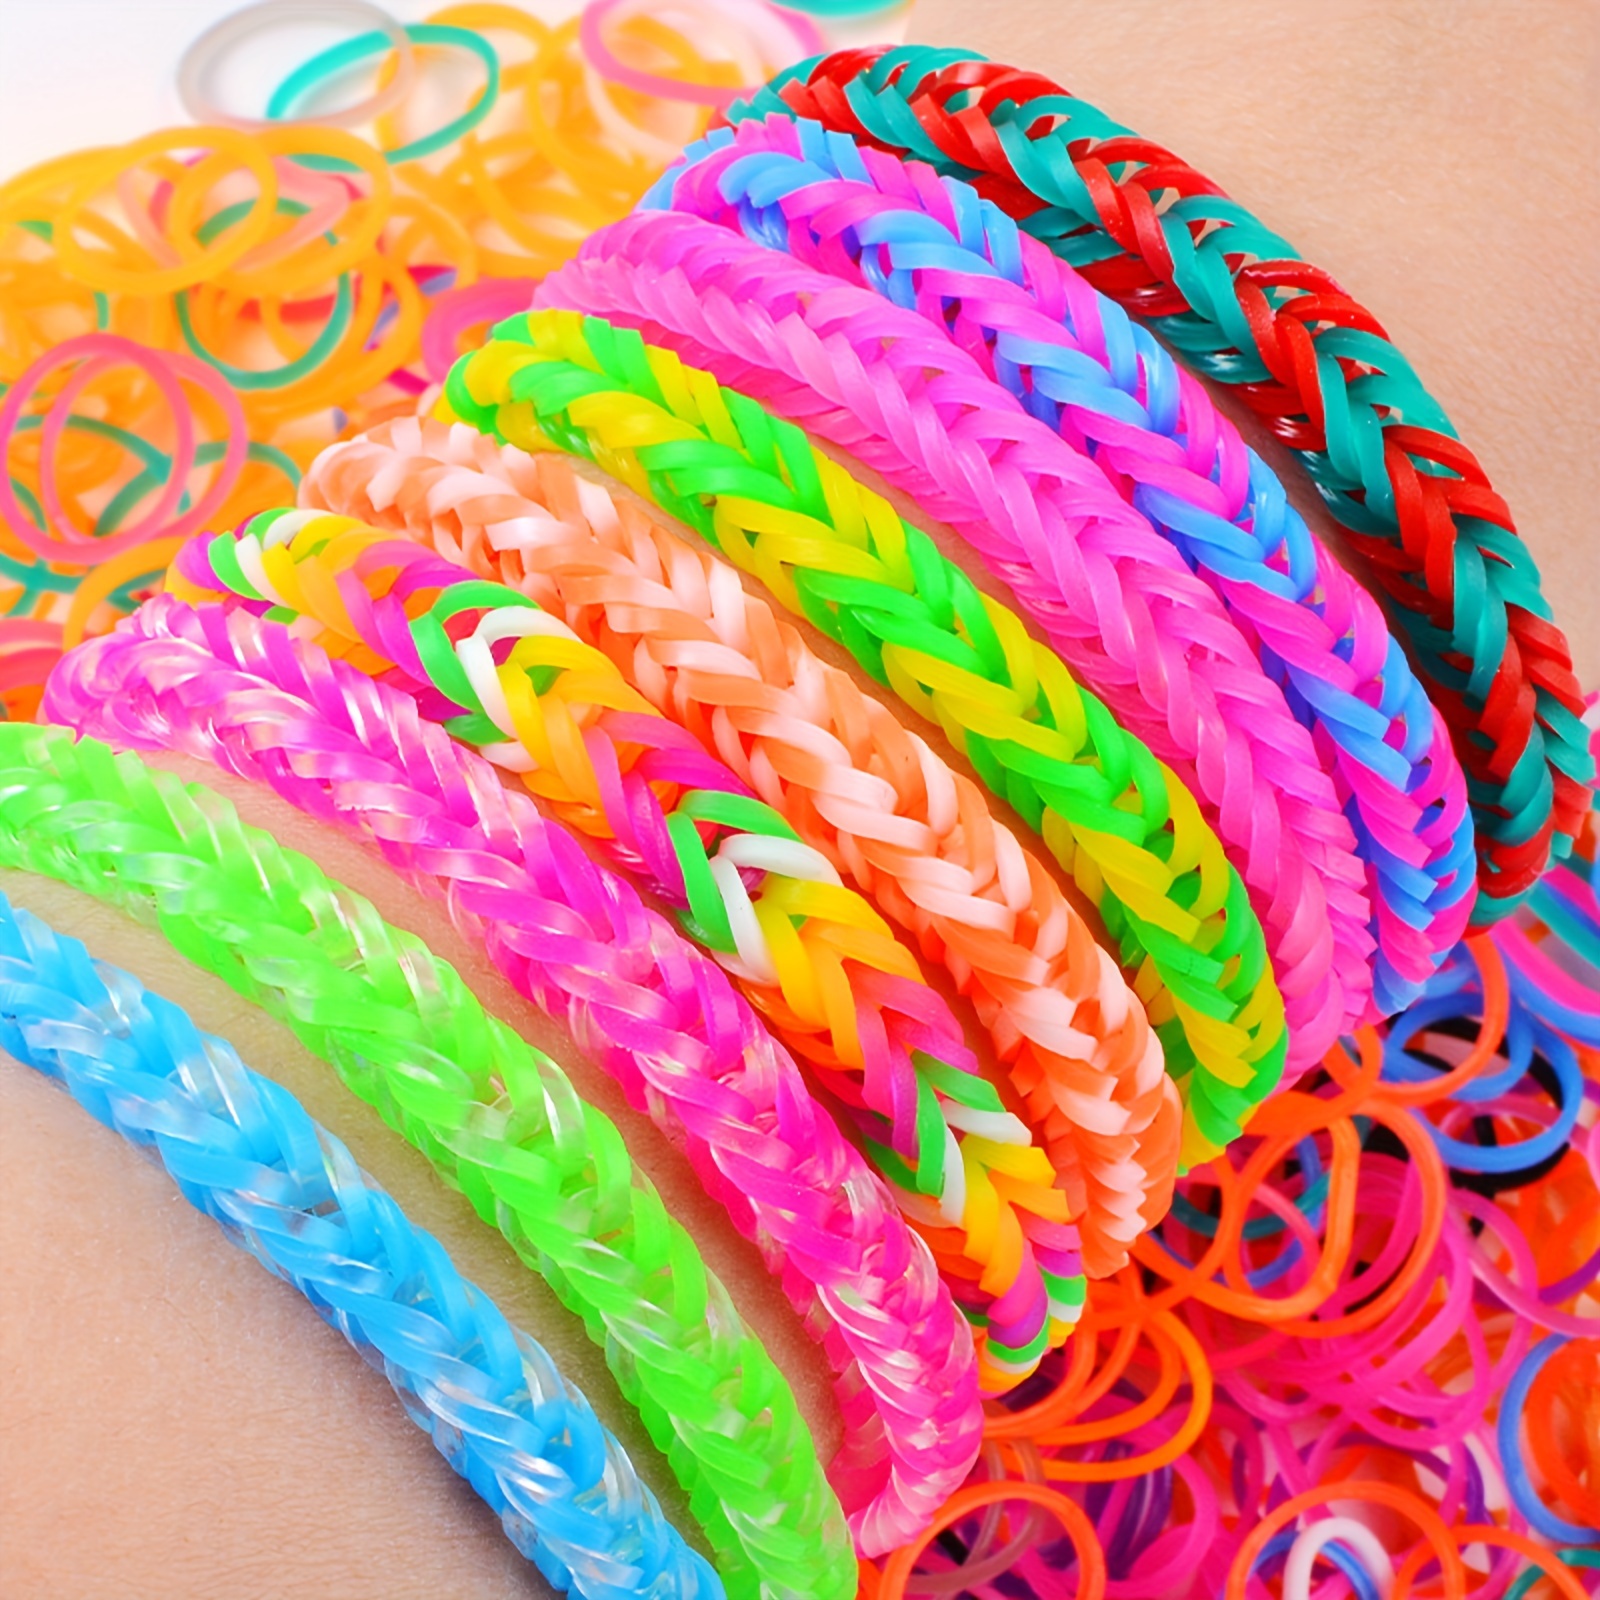 Rubber Band Bracelet, How To Make A Colorful Bracelet With Rubber Bands